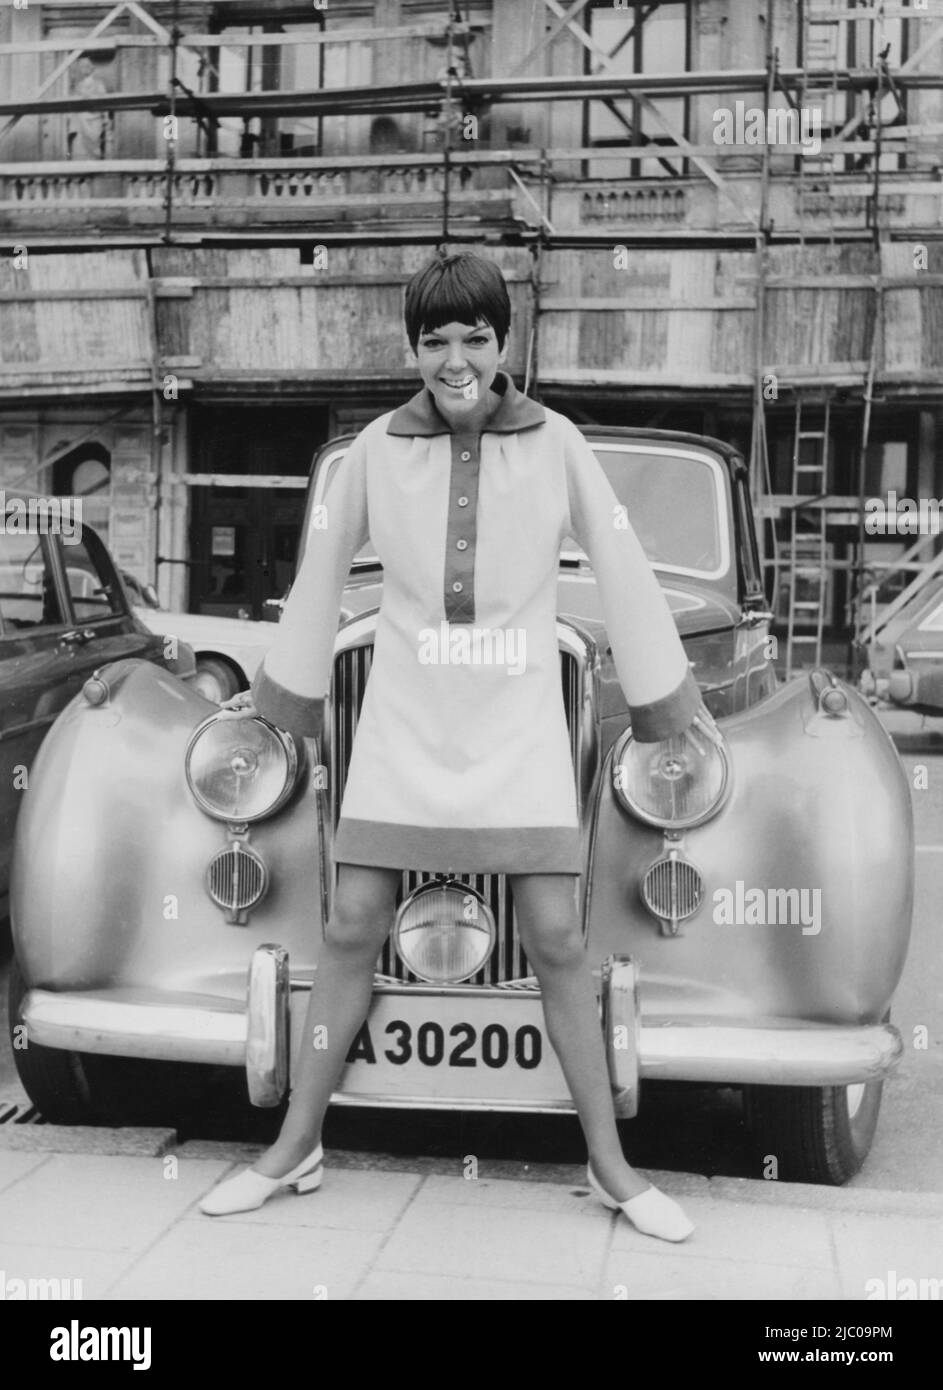 Mary Quant. Born 11 February 1930. British fashion designer and fashion icon. She became an instrumental figure in the 1960s London-based Mod and youth fashion movements.  She was one of the designers who took credit for the miniskirt and hotpants. Picture of her in front of the luxury car wearing a creation of her own with long wide sleaves and a length of the dress well above her knees. 1966 Stock Photo